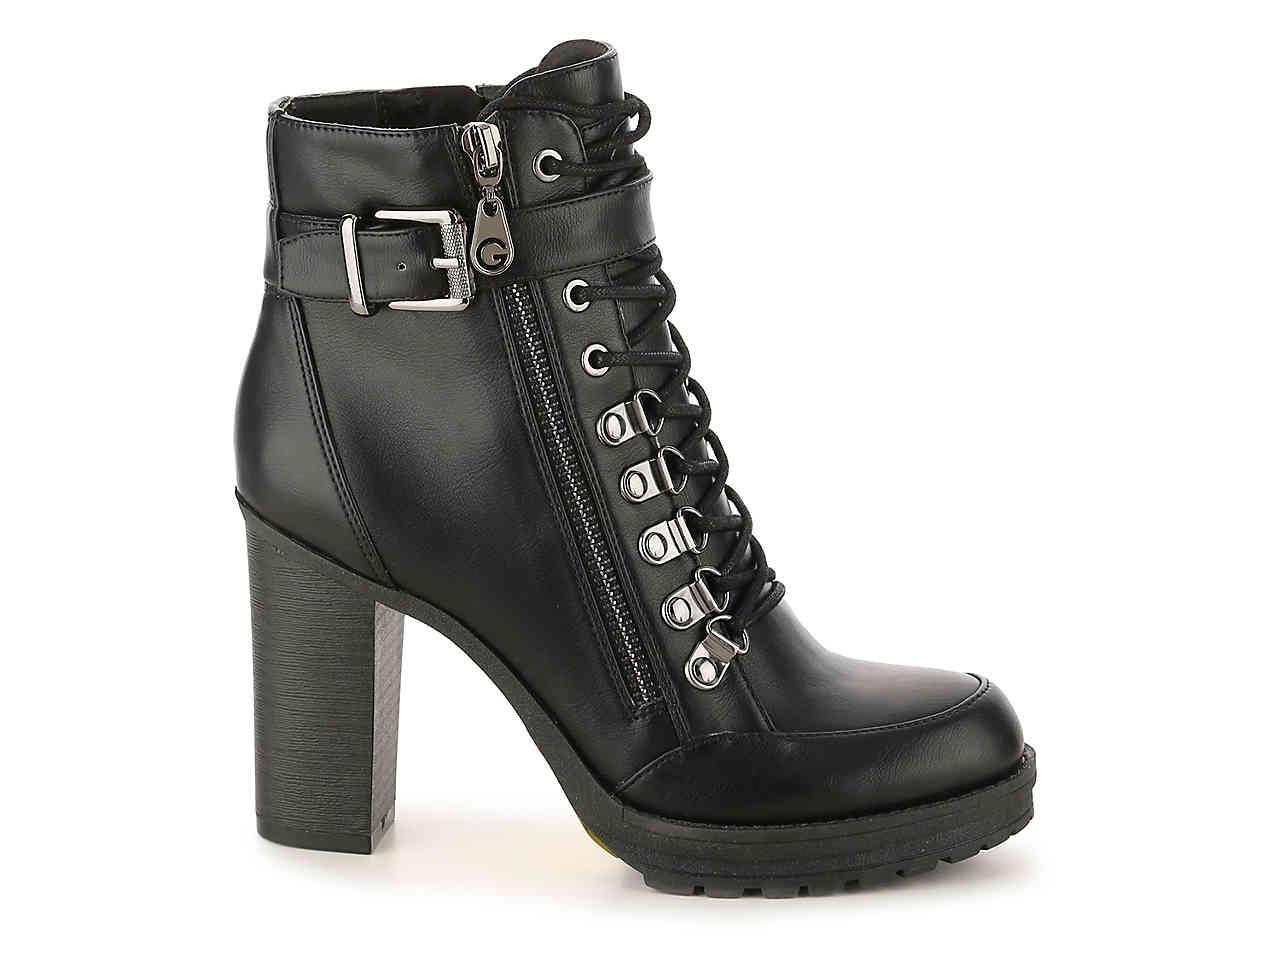 G by Guess Grazzy Bootie in Black - Lyst